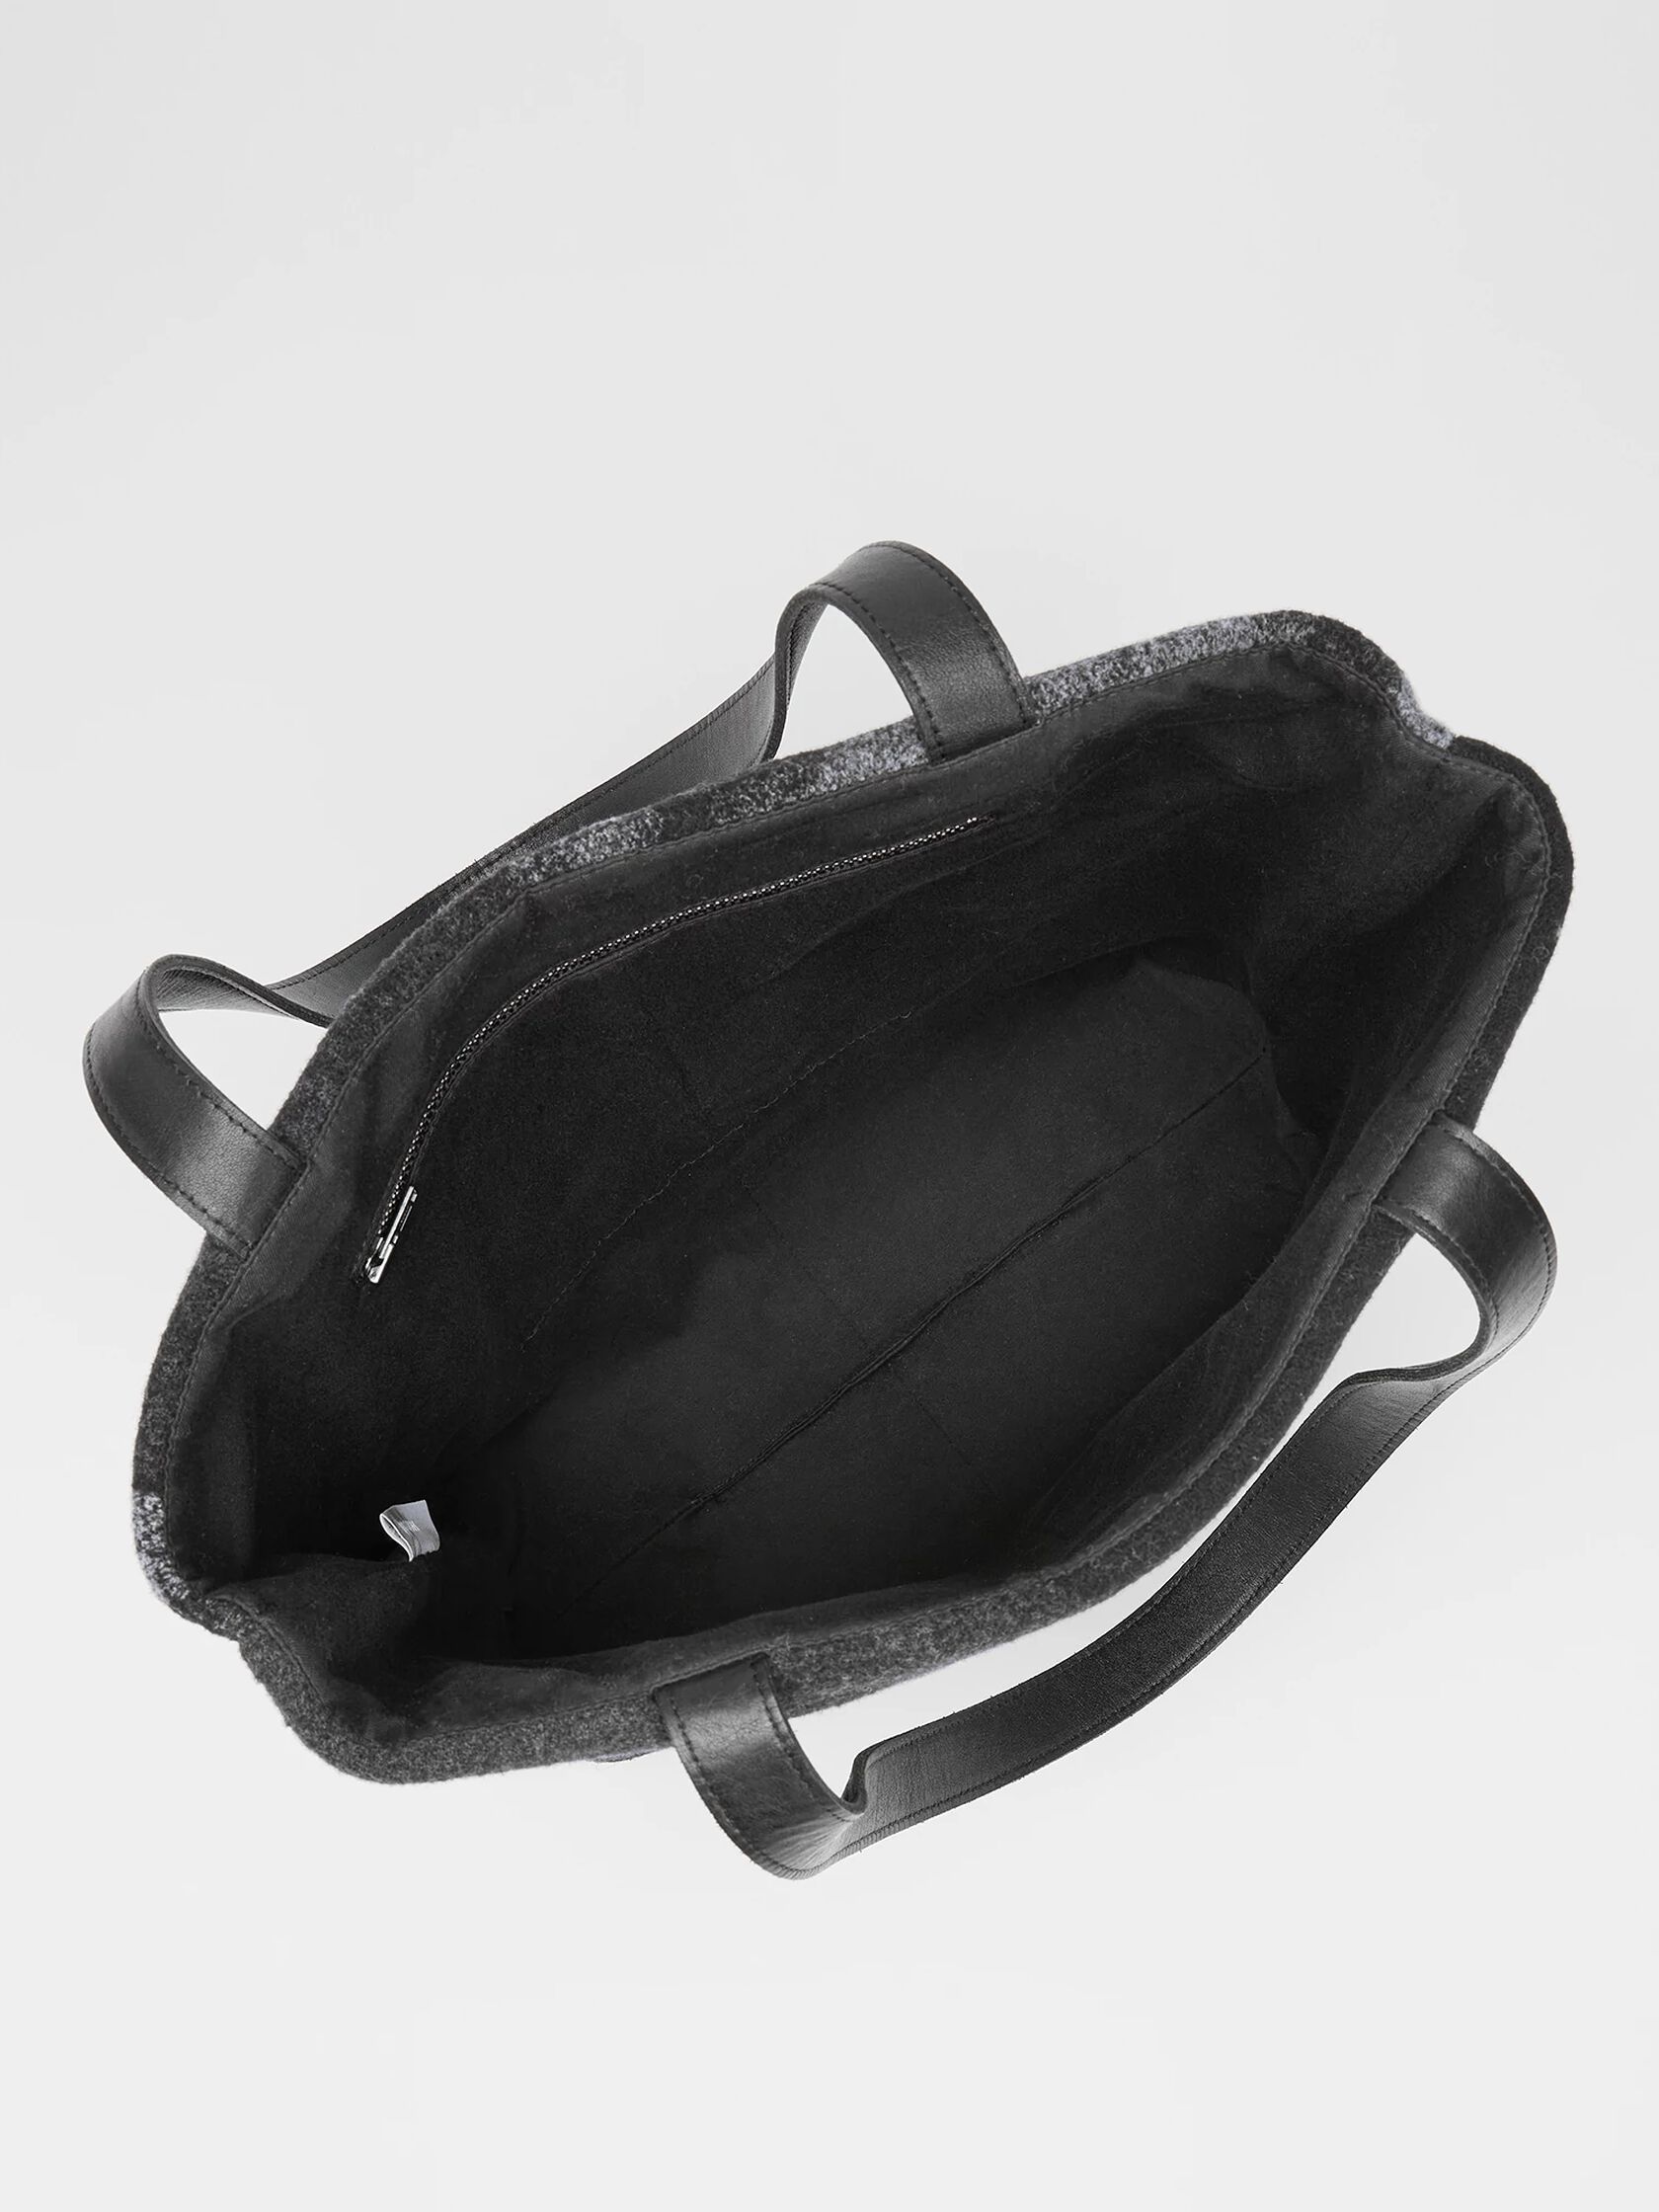 Waste No More Felted Tote | EILEEN FISHER